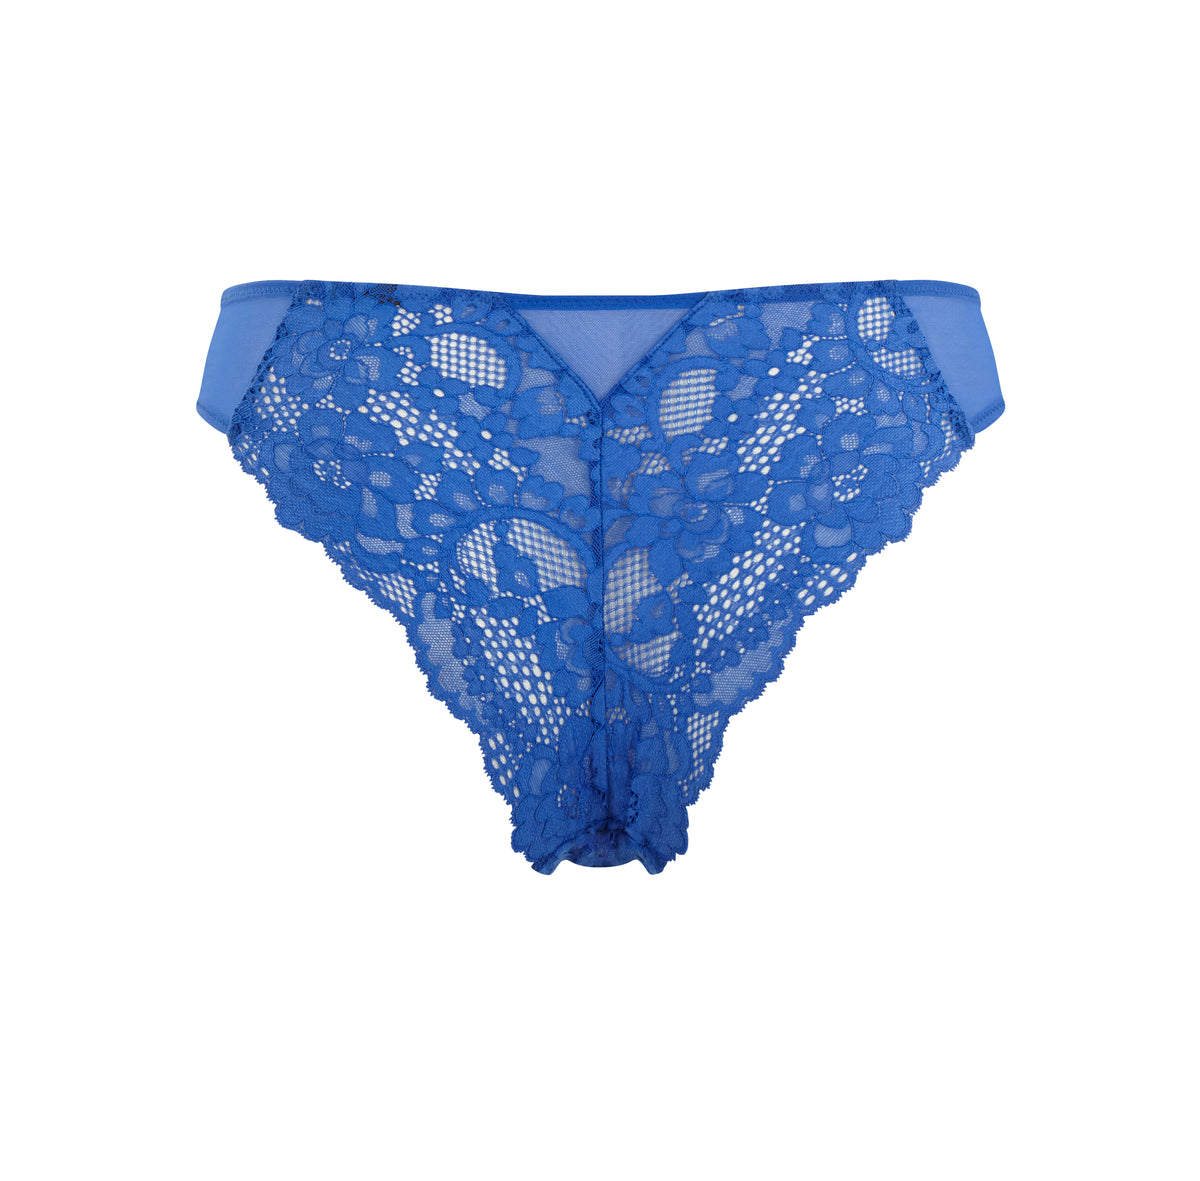 Figleaves Curve Sapphire embroidered zip front brazilian brief in blue